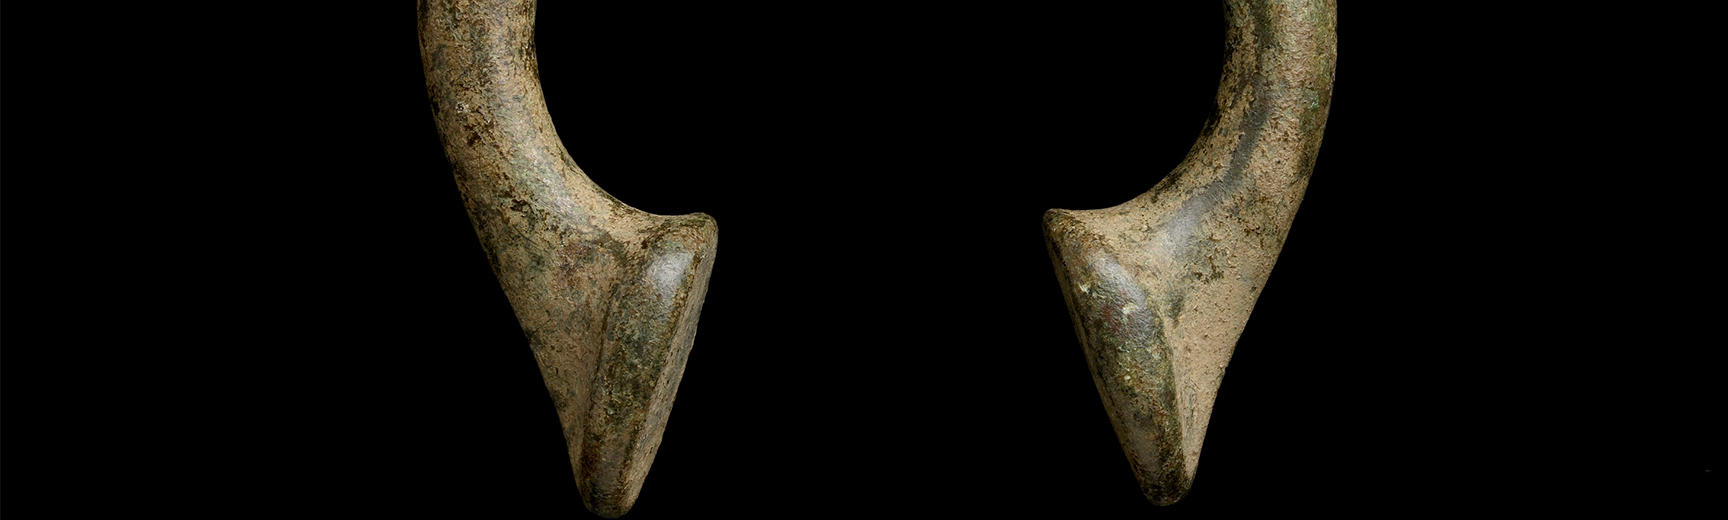 Horseshoe-shaped brass ‘Manilla’ – pre-colonial money in West Africa